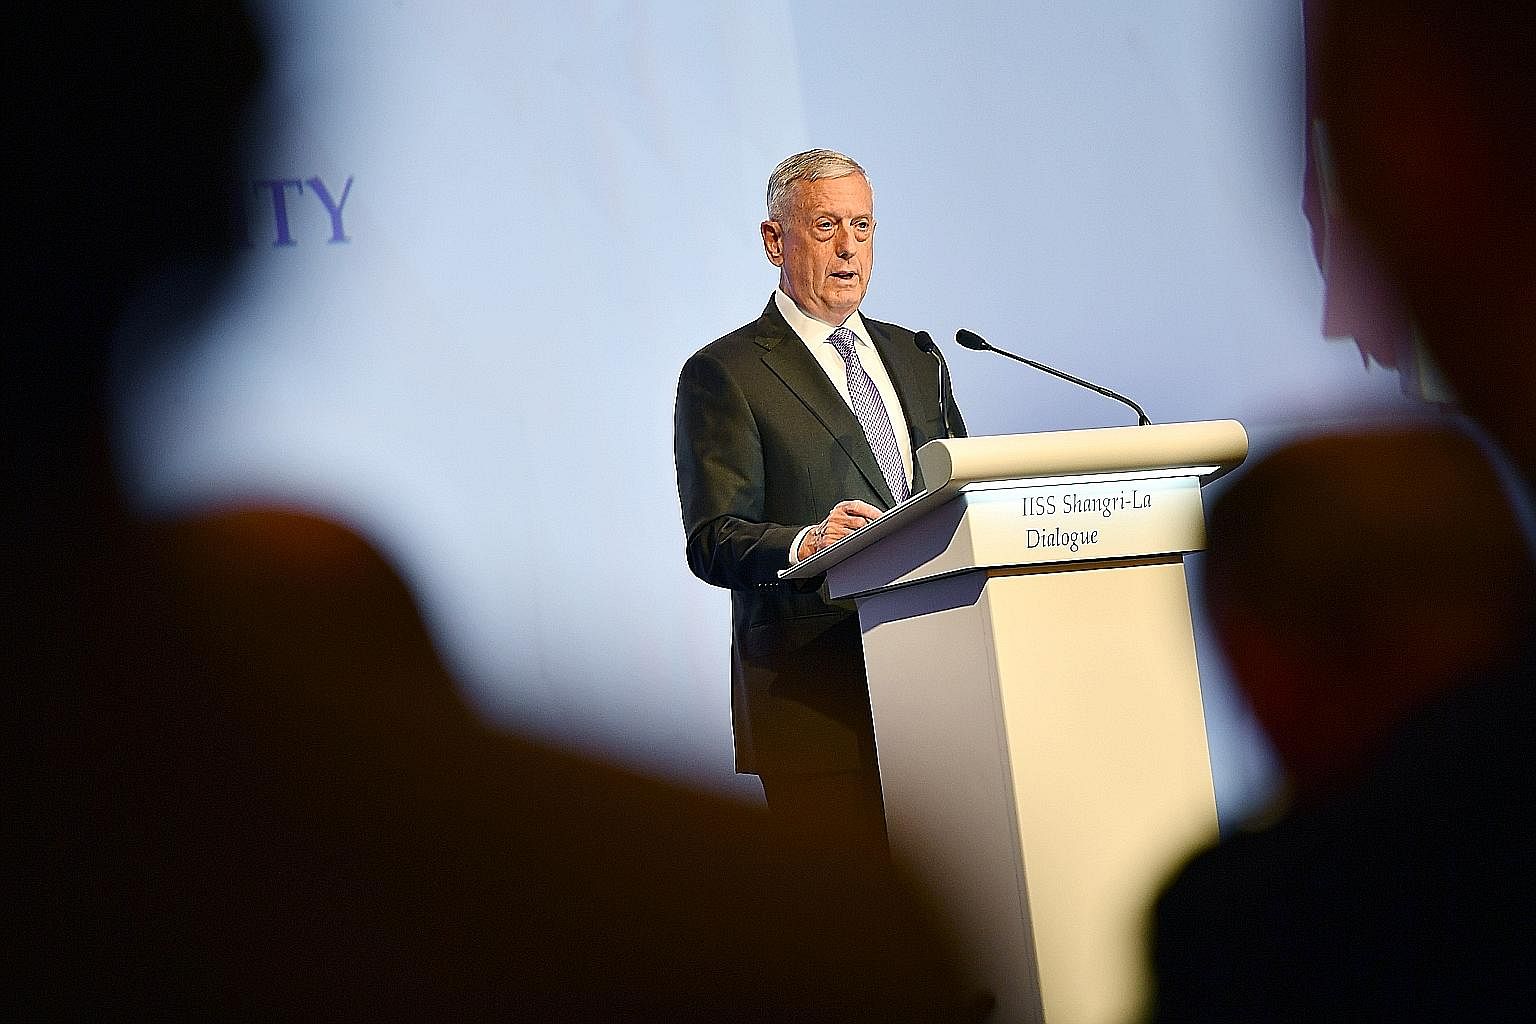 In his speech, US Defence Secretary James Mattis assured countries of America's enduring commitment to the region's security and prosperity.